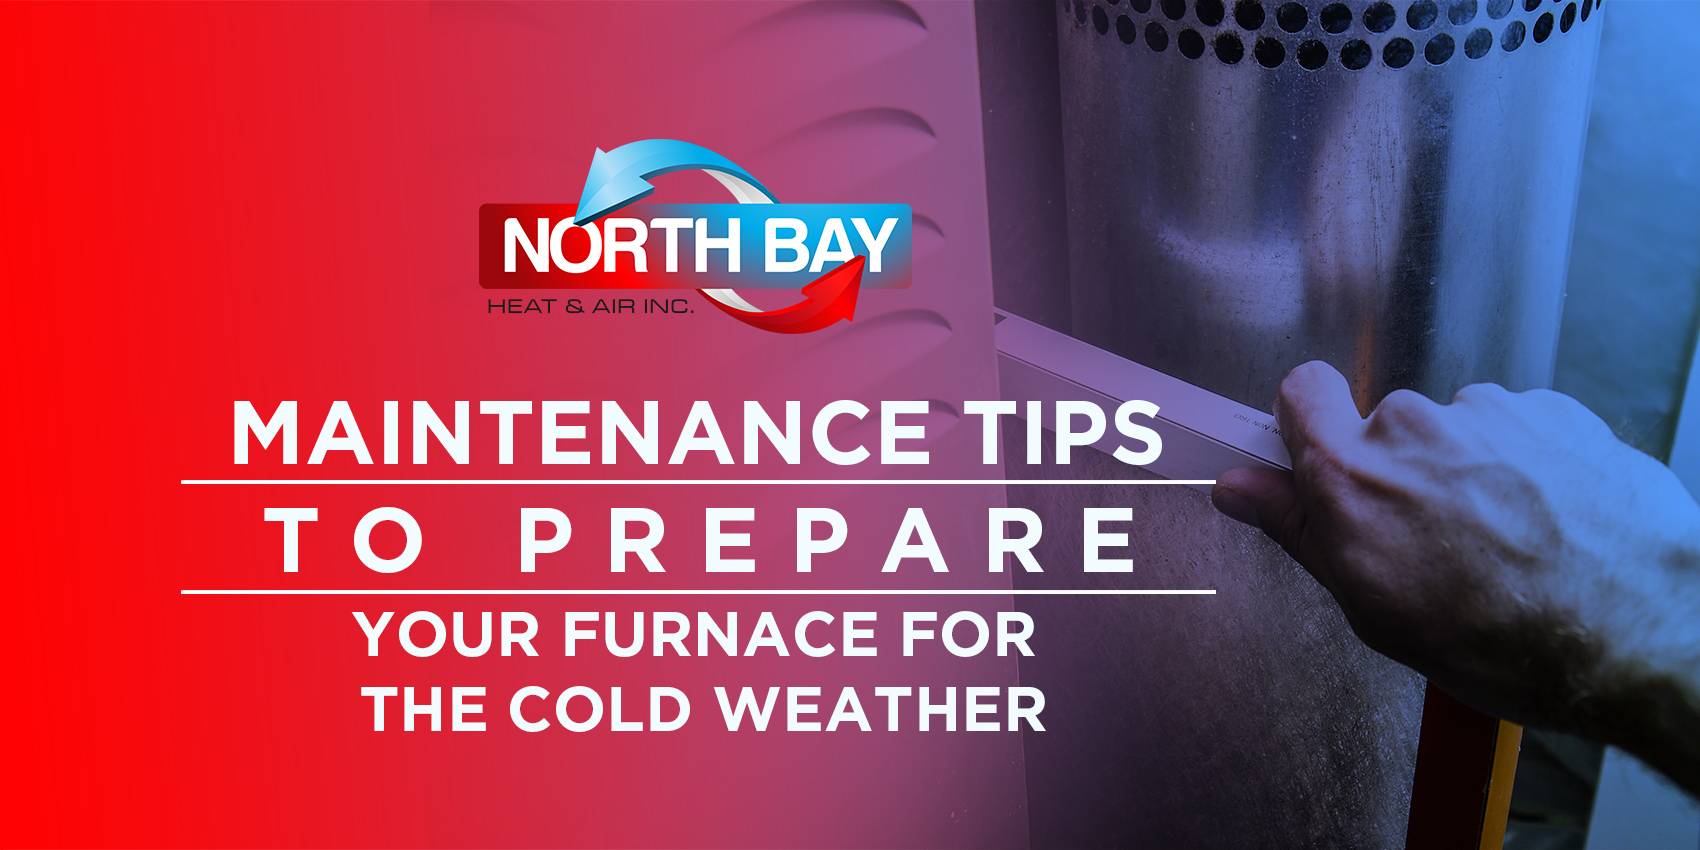 Maintenance Tips to Prepare Your Furnace for the Cold Weather